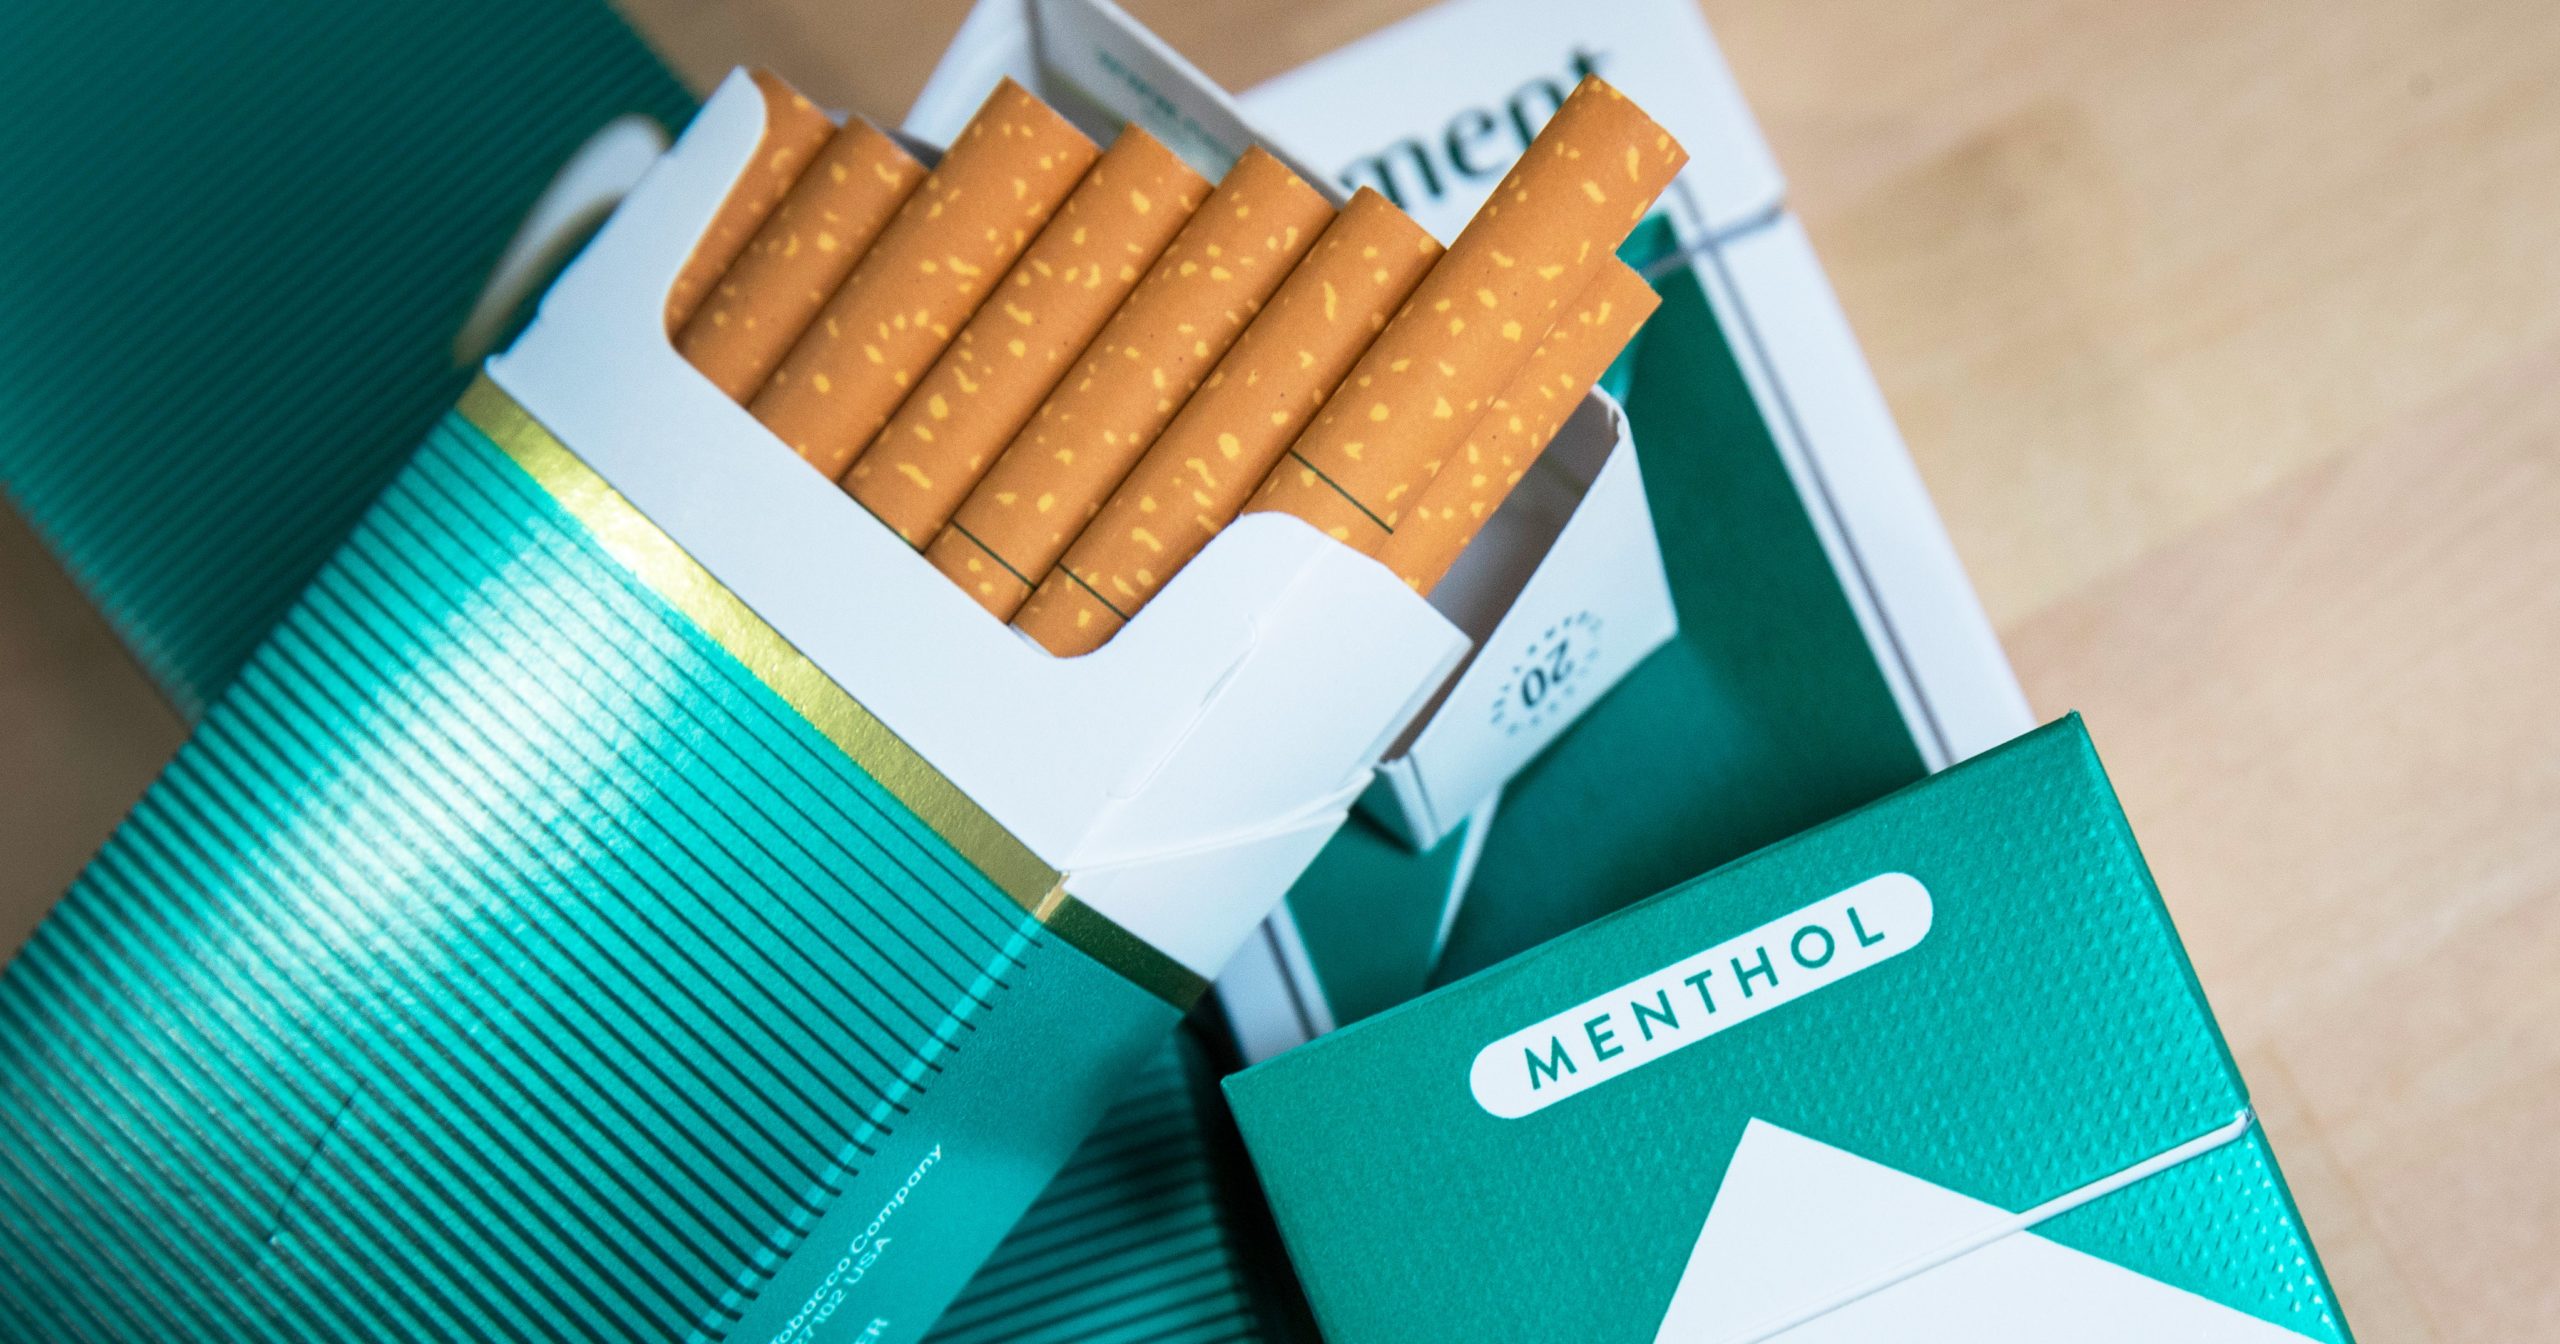 Tasty News: FDA to Ban Menthol Cigarettes and Flavored Cigars - Salud America